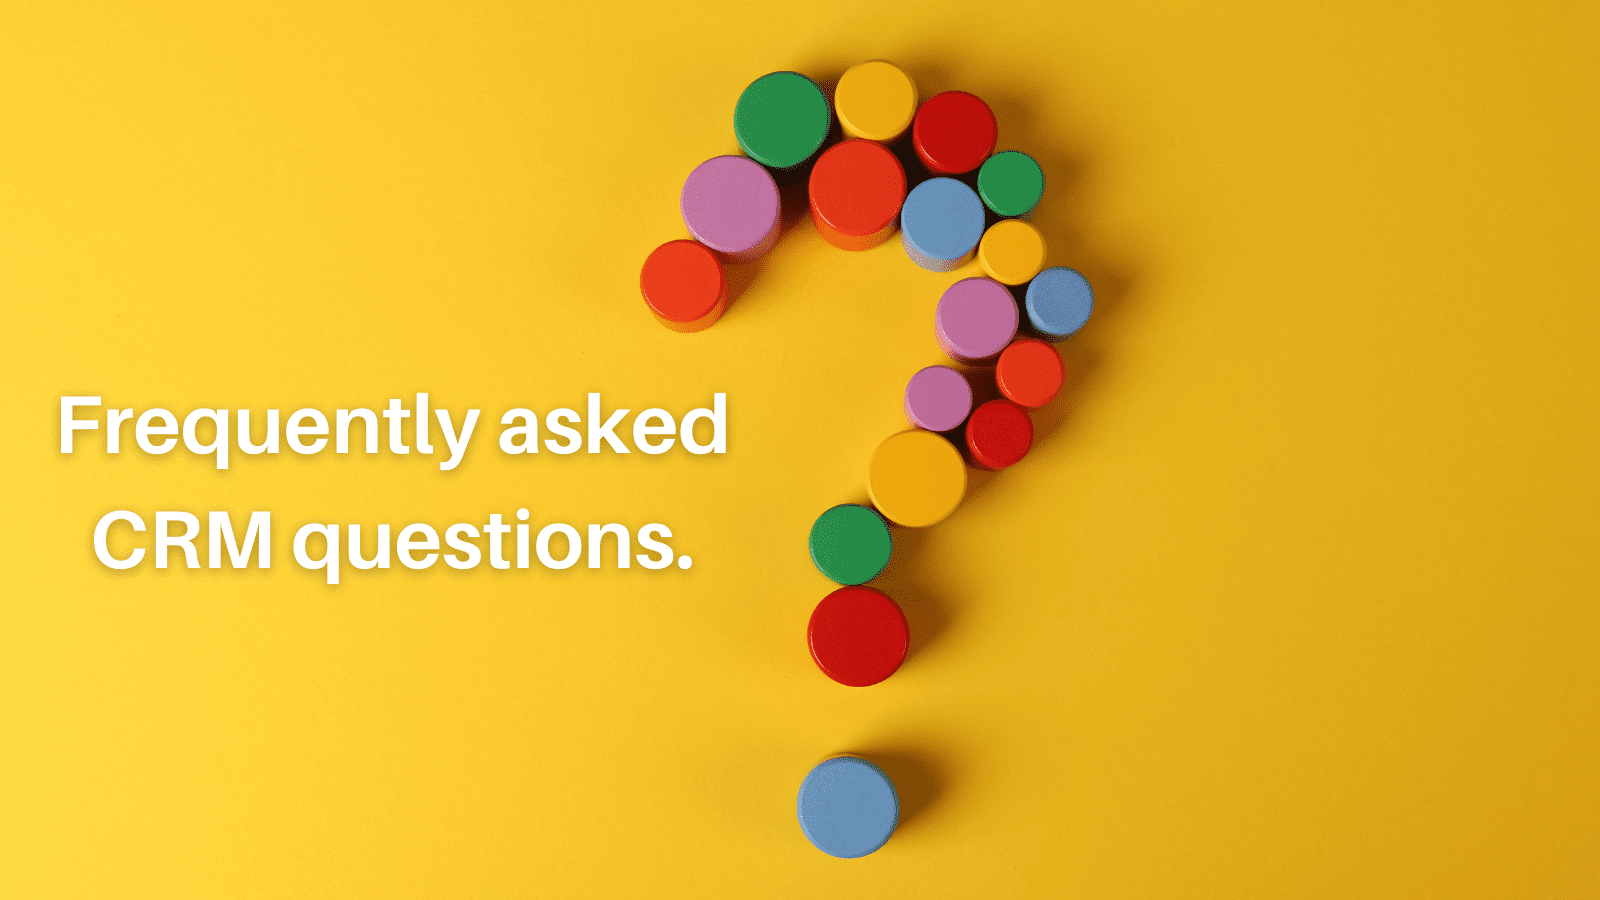 Frequently asked CRM questions colourful question mark